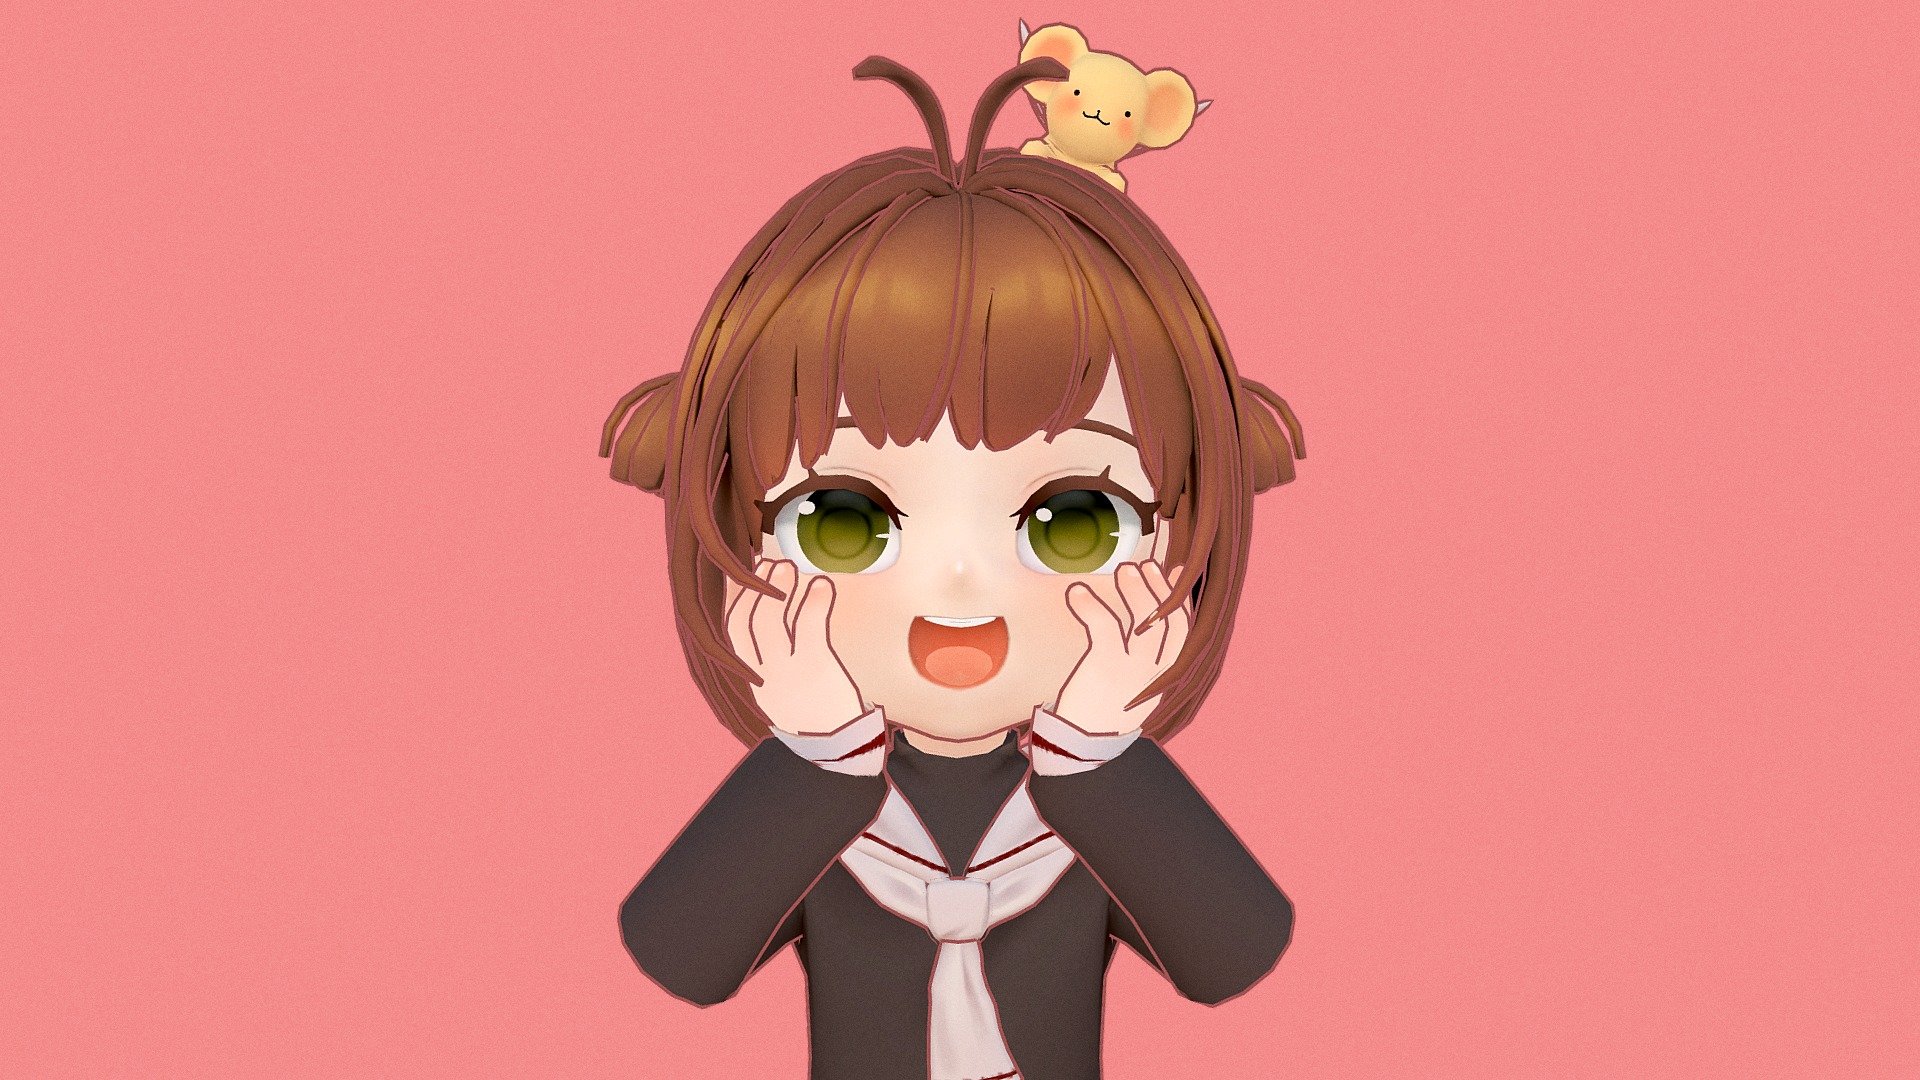 This is a fan art of my favorite character, Cardcaptor Sakura.
I loved her ever since i was young. Hope you guys love it as i do 3d model